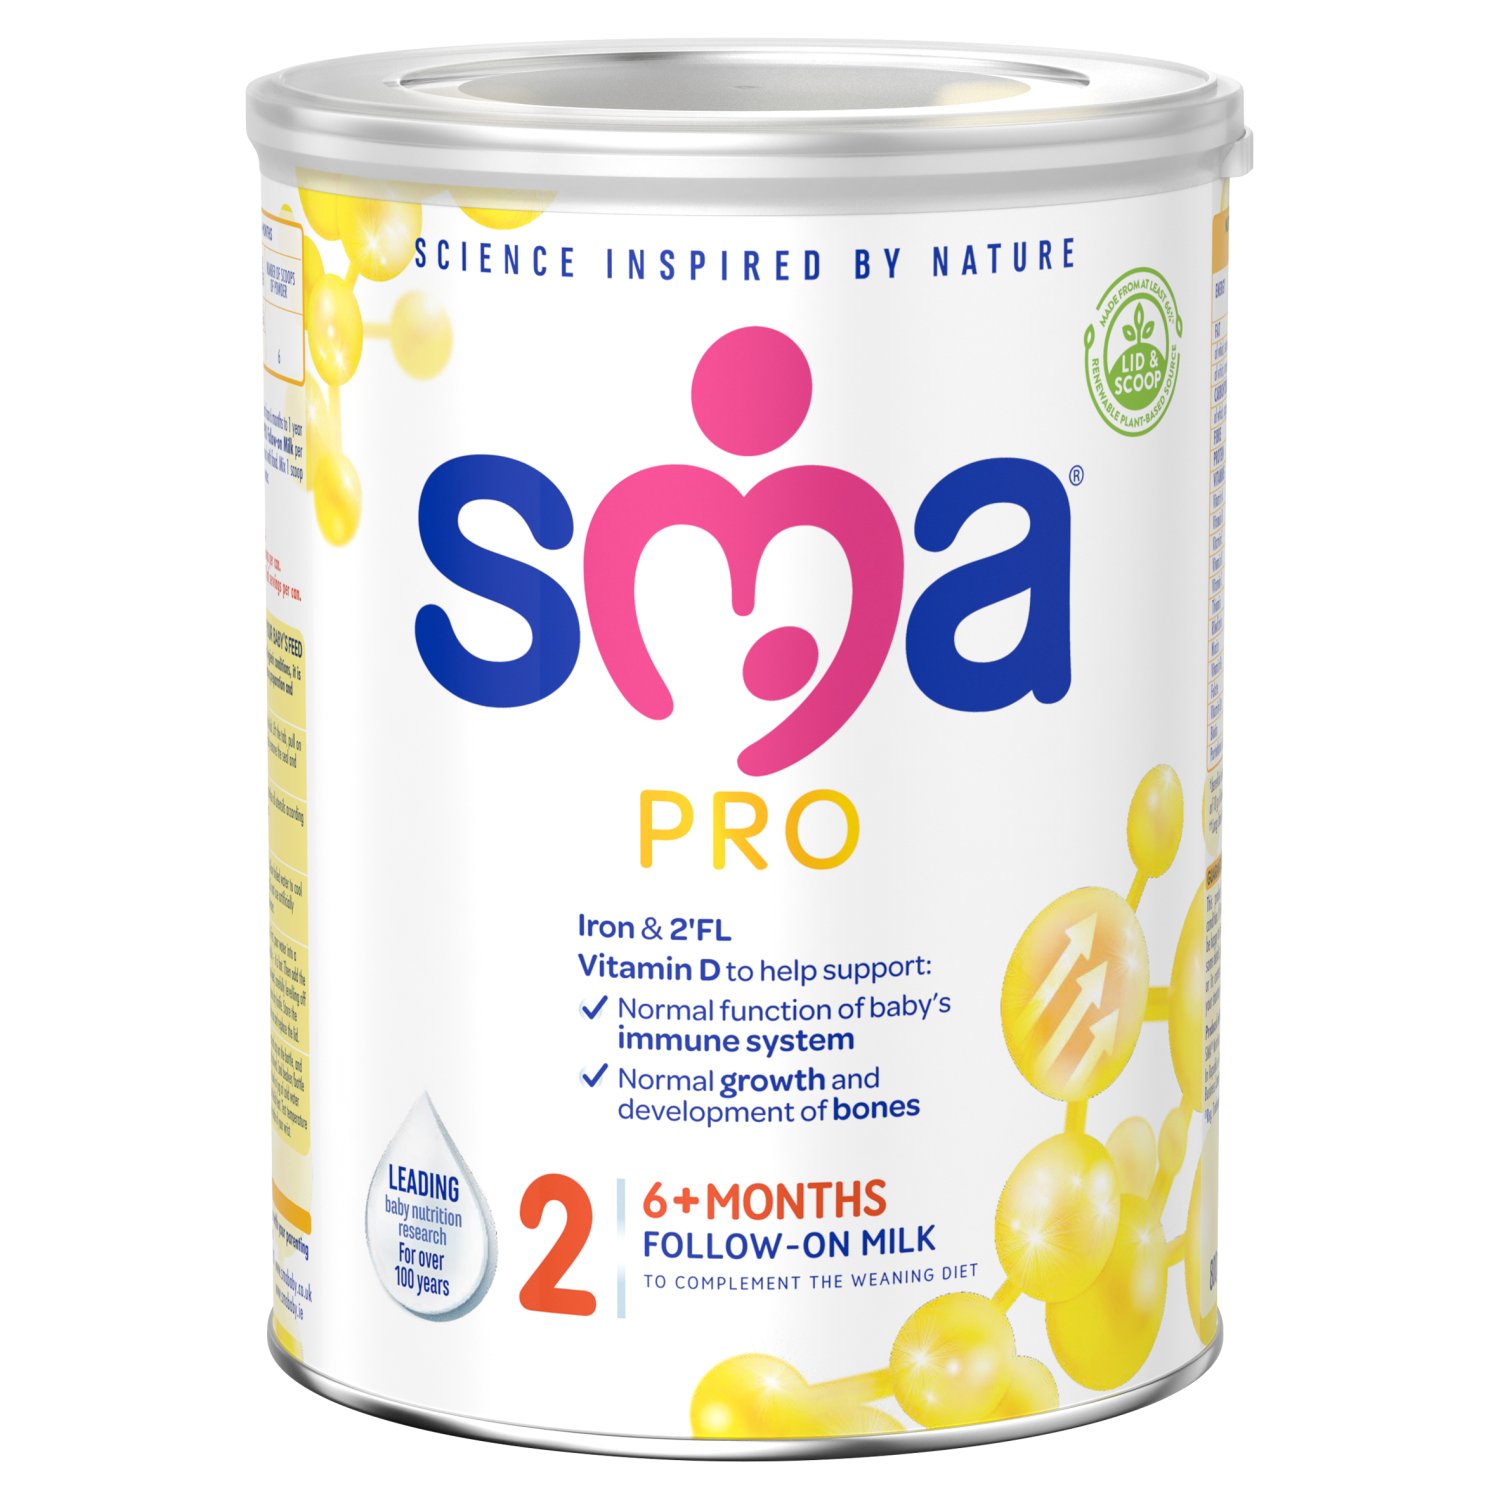 Stage 2, 6 months+
To complement the weaning diet.  

SMA® PRO Follow-on Baby Milk is tailored for babies from 6 months as part of a varied weaning diet. At 6 months babies development progresses quickly and they start to run out of the iron stores they had from their mothers, so their iron needs increase at this stage. SMA® PRO Follow-on Baby Milk Powder Formula is enriched with iron to help support normal cognitive development and contains 2’FL – our latest breakthrough in baby nutrition. We have been leading research in baby nutrition for over 100 years and have over 70 years breast milk research. Our follow-on baby formula milk contains vitamin D and calcium to support the normal growth and development of bones and Omega 3 & 6* to support normal development and growth. This stage 2 follow-on baby milk powder is Halal Certified. No palm oil. No fish oil.  
*Beneficial effect of essential fatty acids is obtained with a daily intake of 10 g of linoleic acid and 2 g of α-linolenic acid.

Also available in resealable ready-to-drink liquids. Ready-to-use liquid formula milk does not require any preparation. Just shake and pour them straight into a sterilised bottle or beaker. Available in 1 litre and 200 ml on-the-go resealable cartons.

Moving to the next stage?
12 months to 3 years 
From 12 months, your baby will go through an amazing period of growth and development and their nutritional needs will change.  SMA® PRO Growing Up Baby Milk  is one way to help support your child’s nutrient intake in combination with a balanced, varied diet up until their 4th birthday. Our toddler baby milk contains Omega 3 & 6* to support normal development and growth and vitamins A, C & D to help support the normal function of a child’s immune system. It is enriched with iron to help support normal cognitive development and contains 2’FL - our latest breakthrough in baby nutrition.  